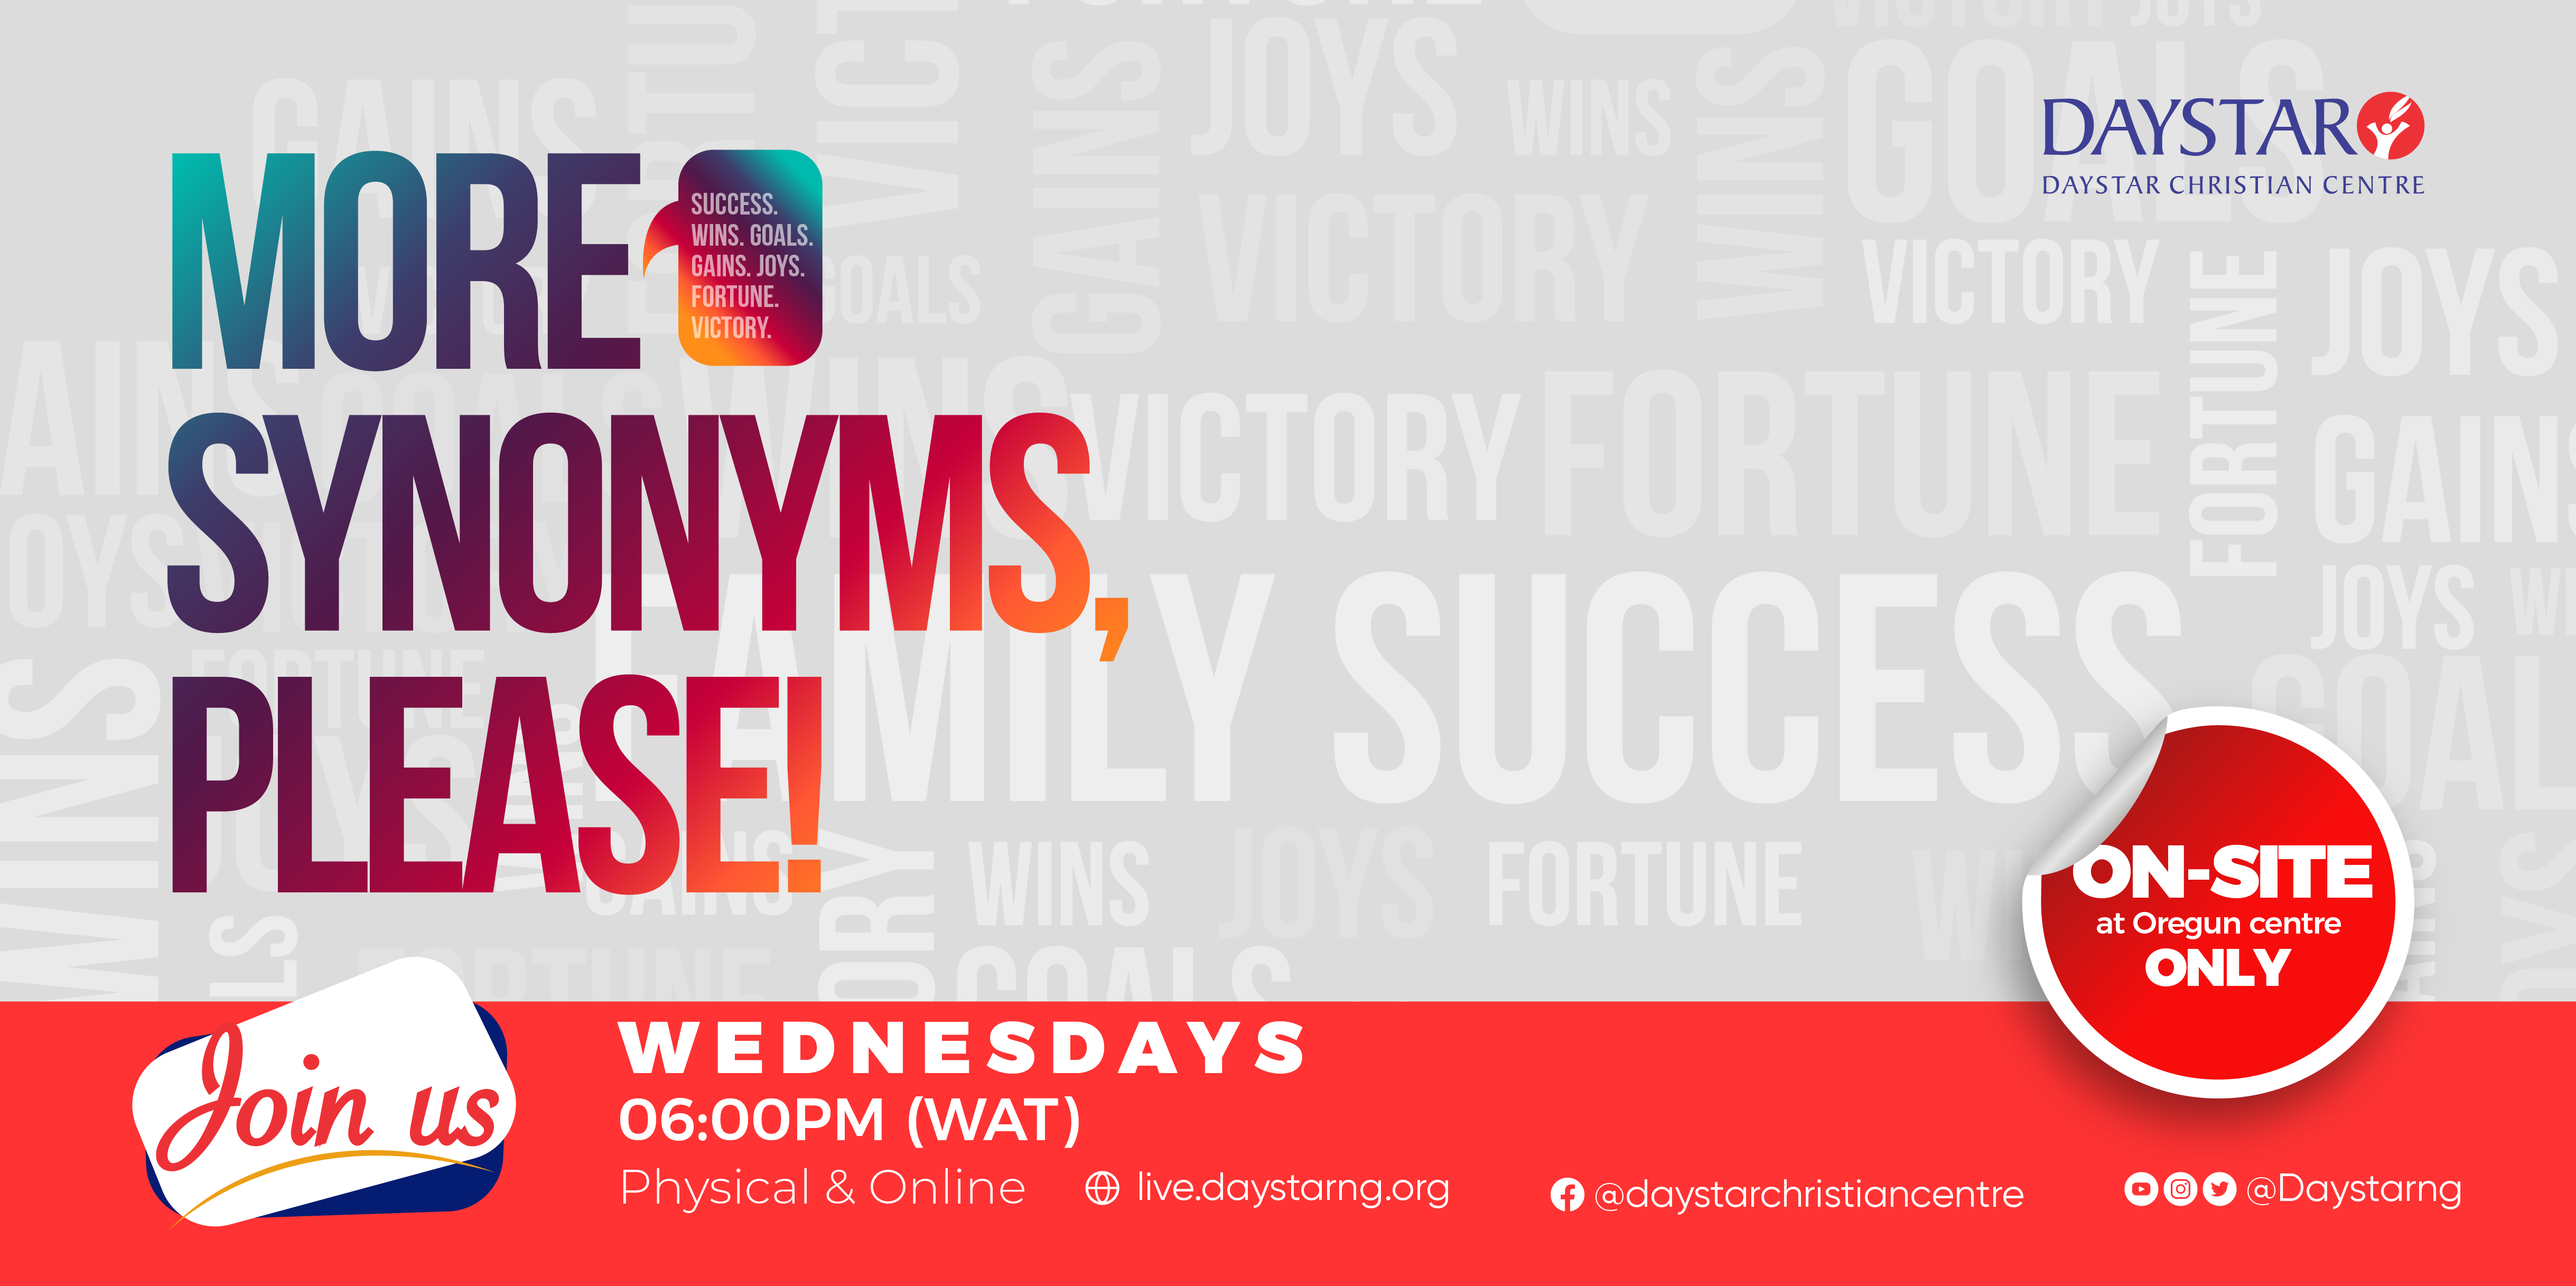 We Need More Synonyms! | Daystar Christian Centre